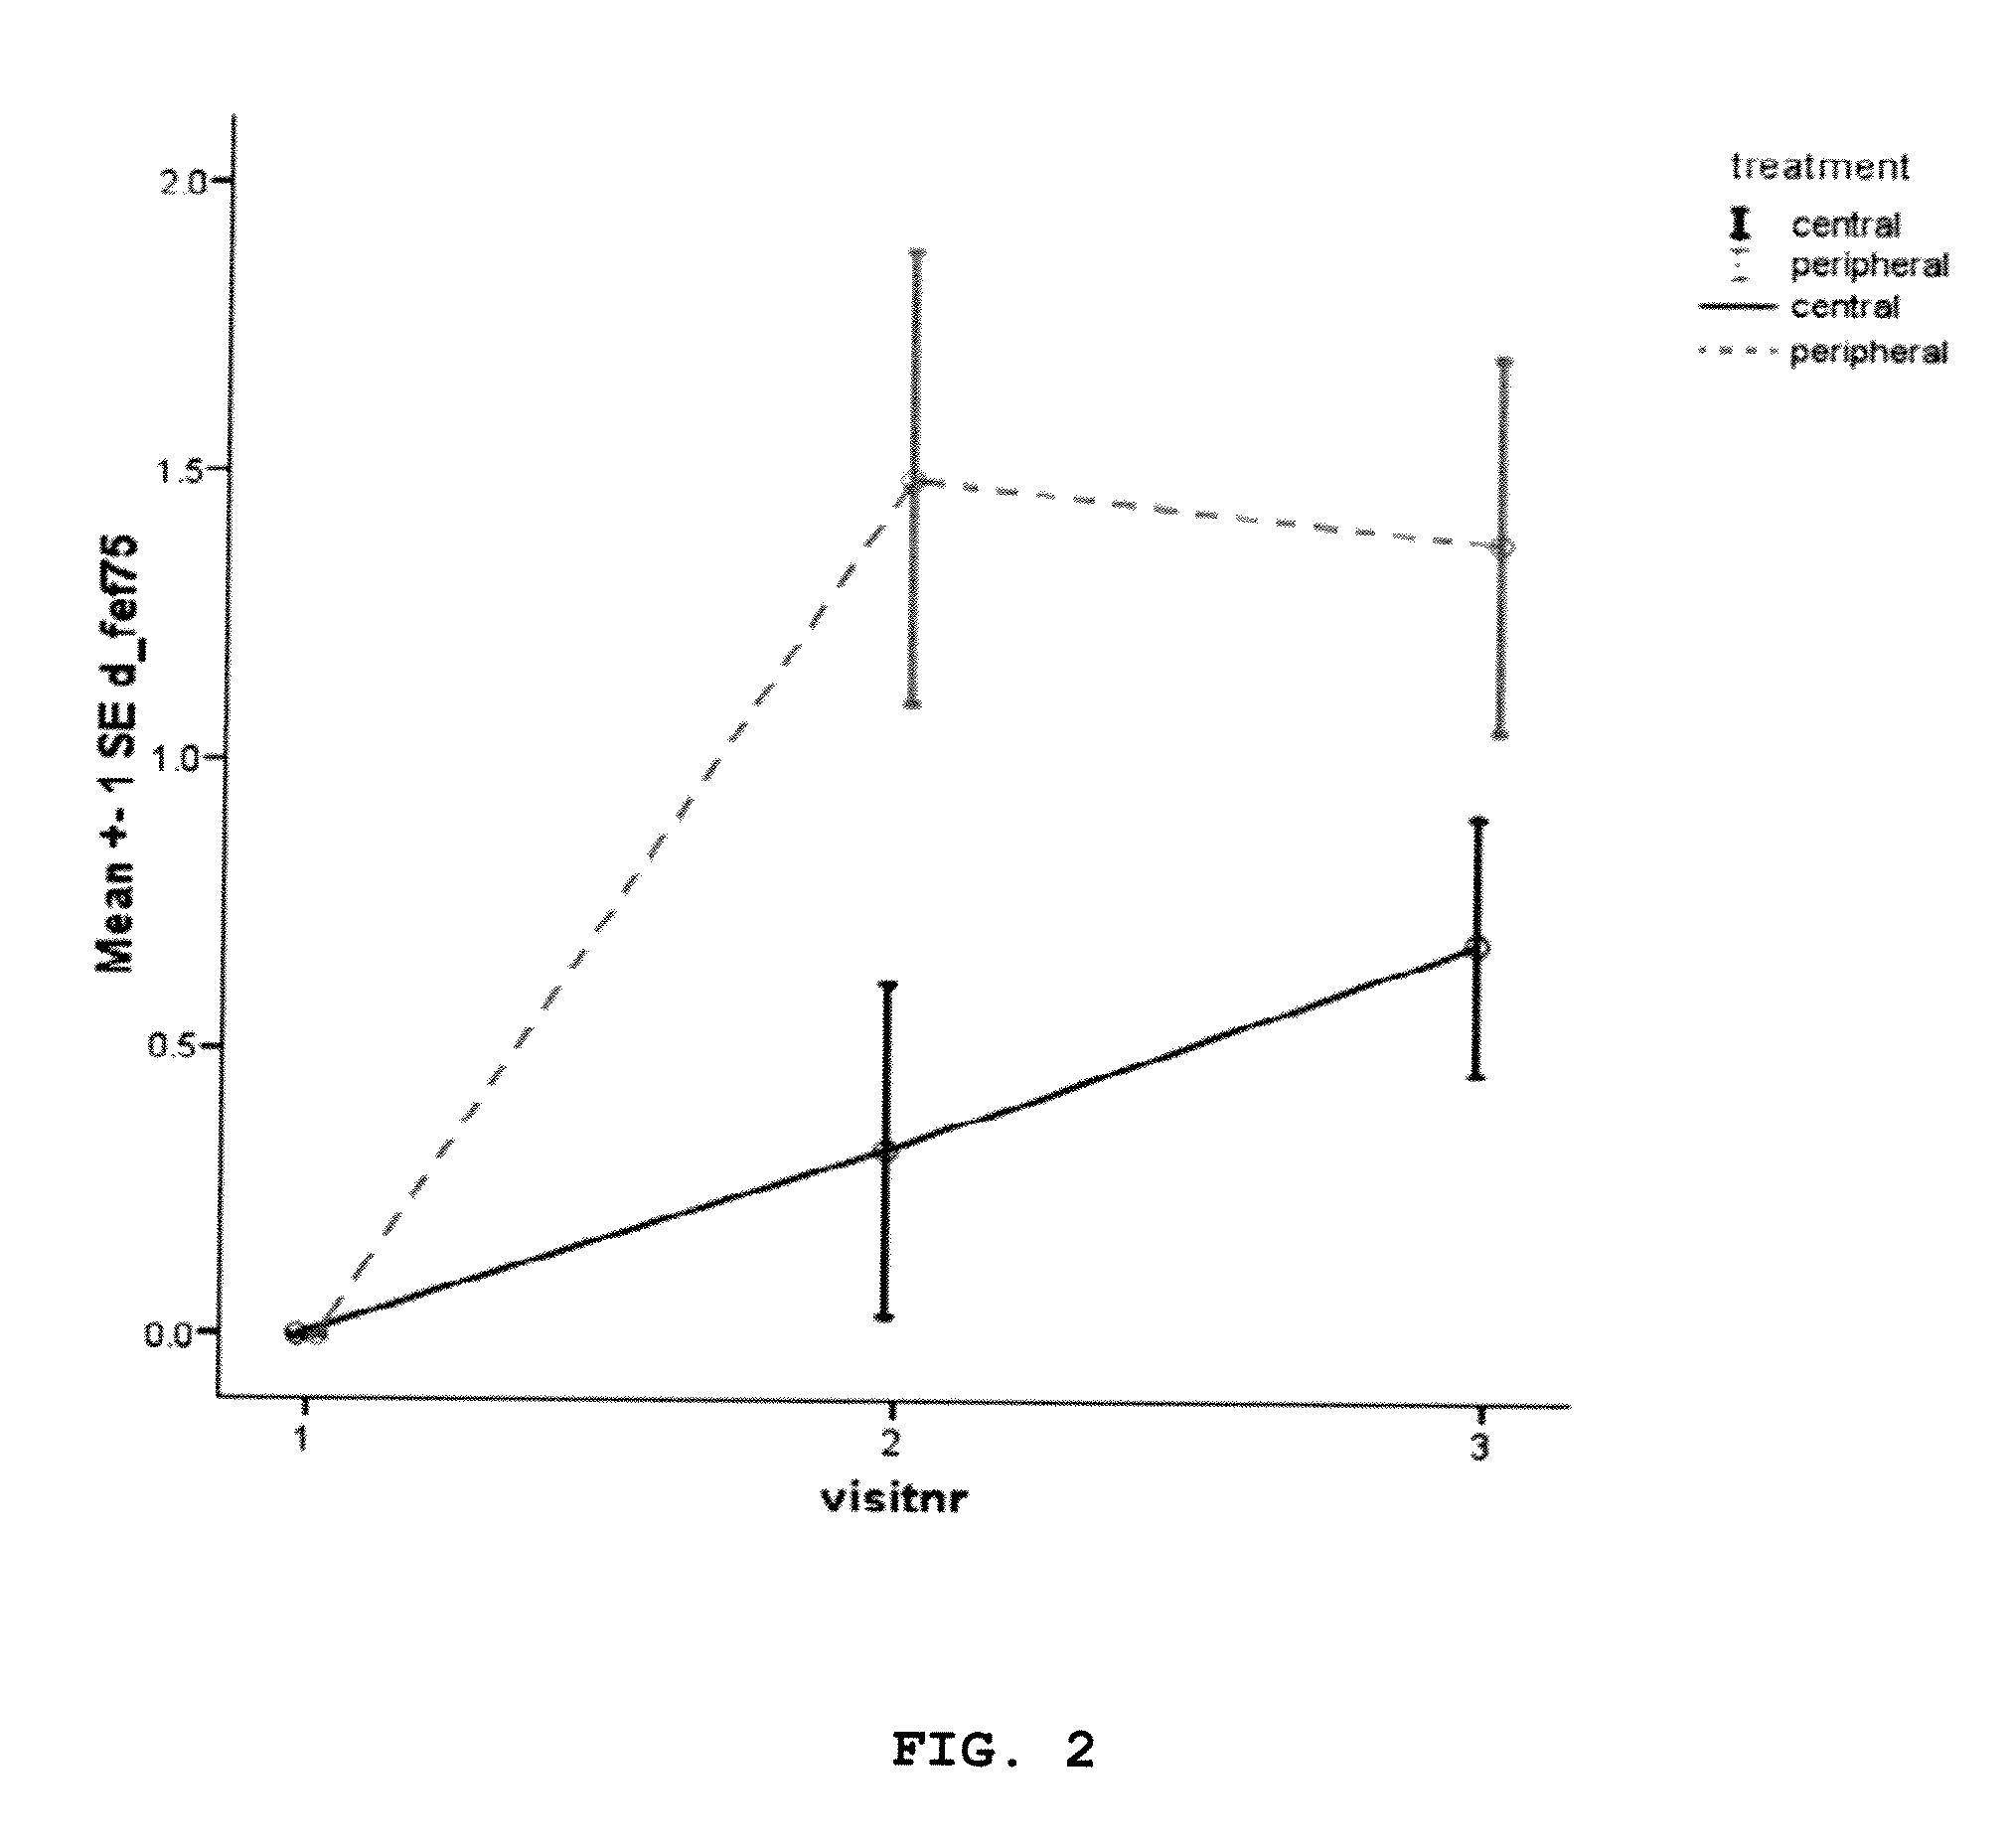 Method for treatment of patients with cystic fibrosis